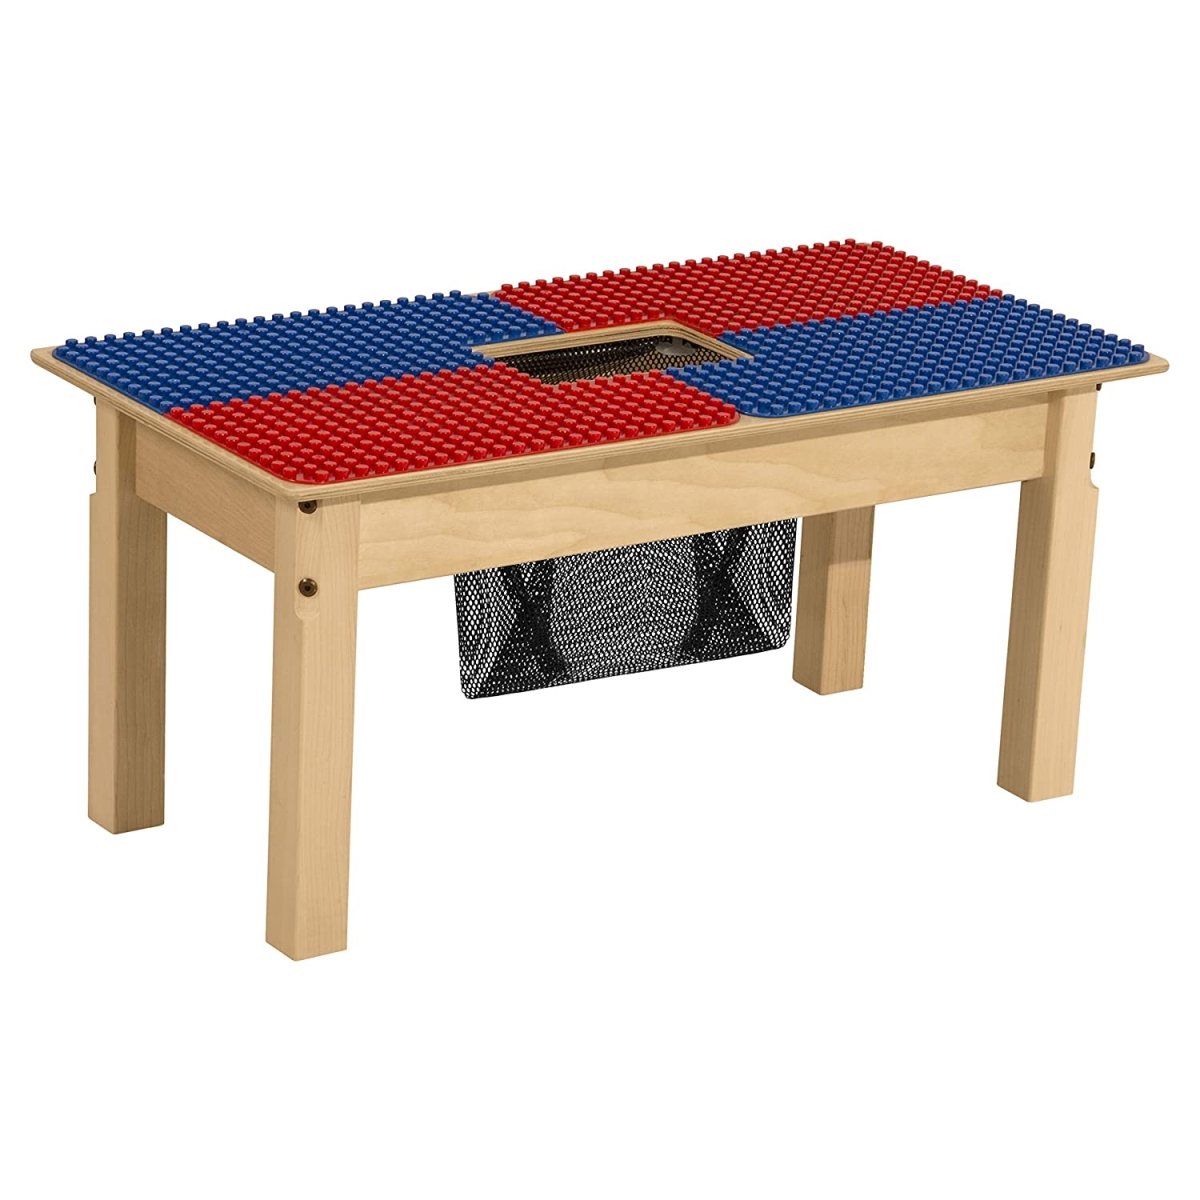 Tp1631pgn18-br 18 In. Duplo Compatible Table With Legs, Blue & Red - Square